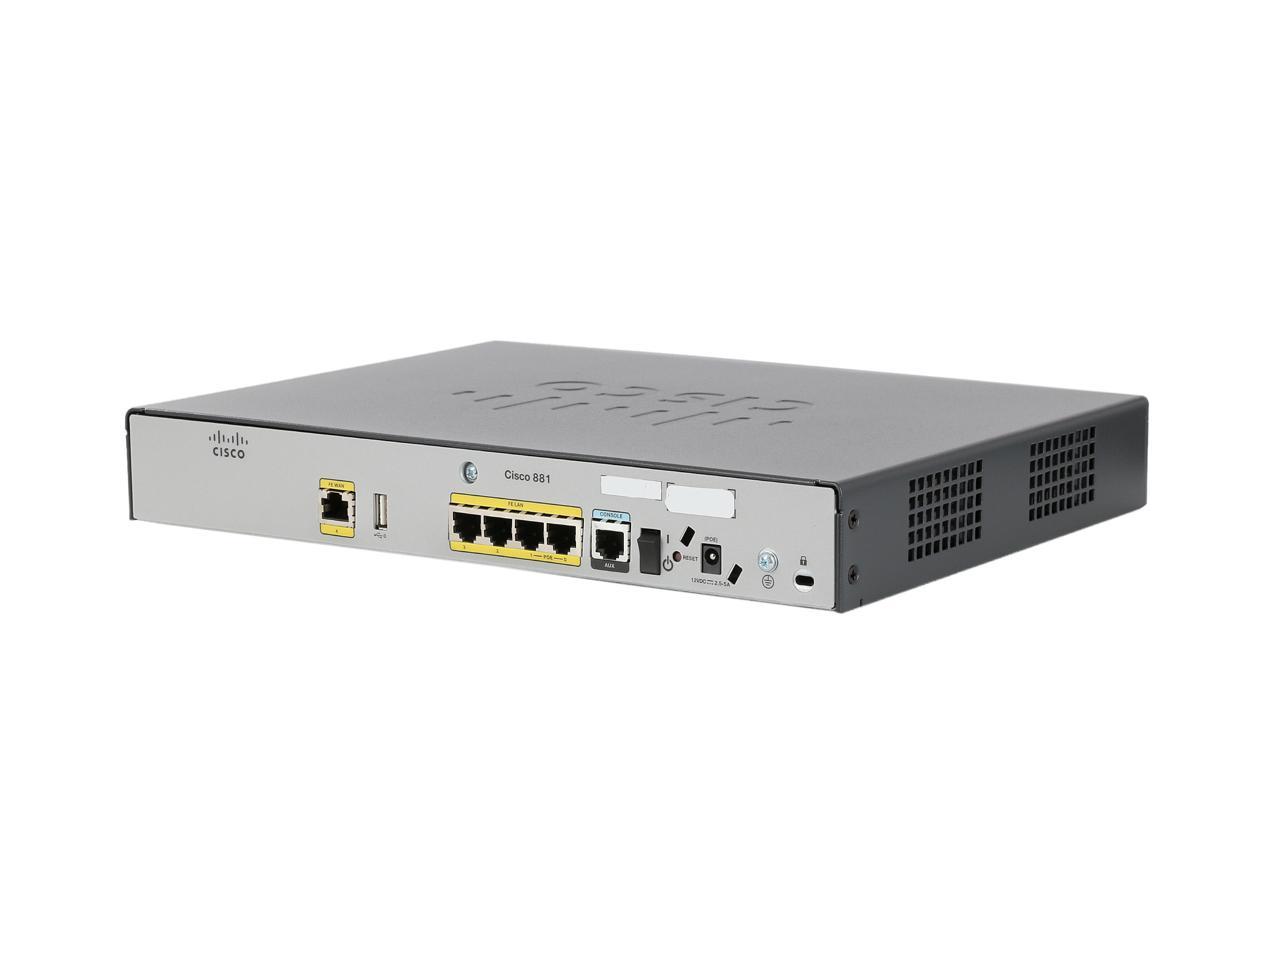 CISCO C881 Wired Ethernet Security Router C881-K9 - Newegg.com